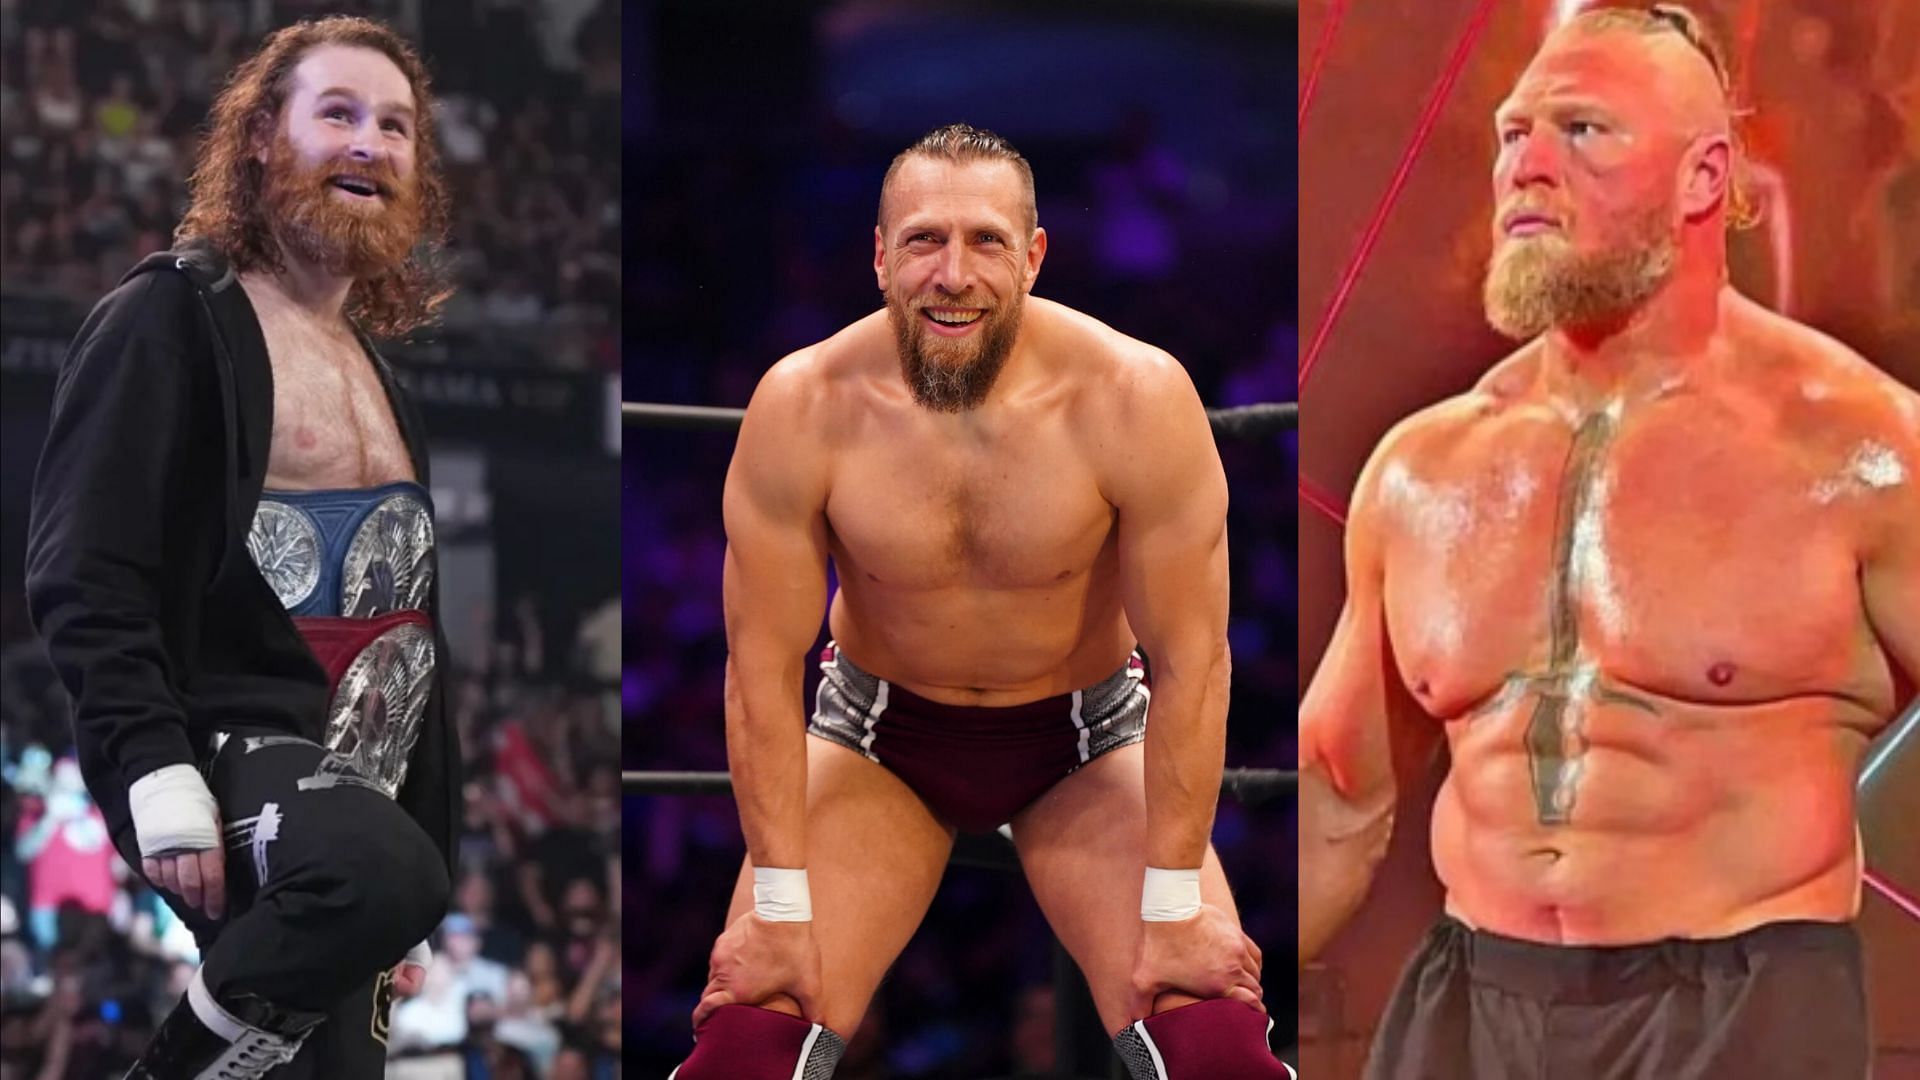 Sami Zayn (left), Bryan Danielson (middle) and Brock Lesnar (right).